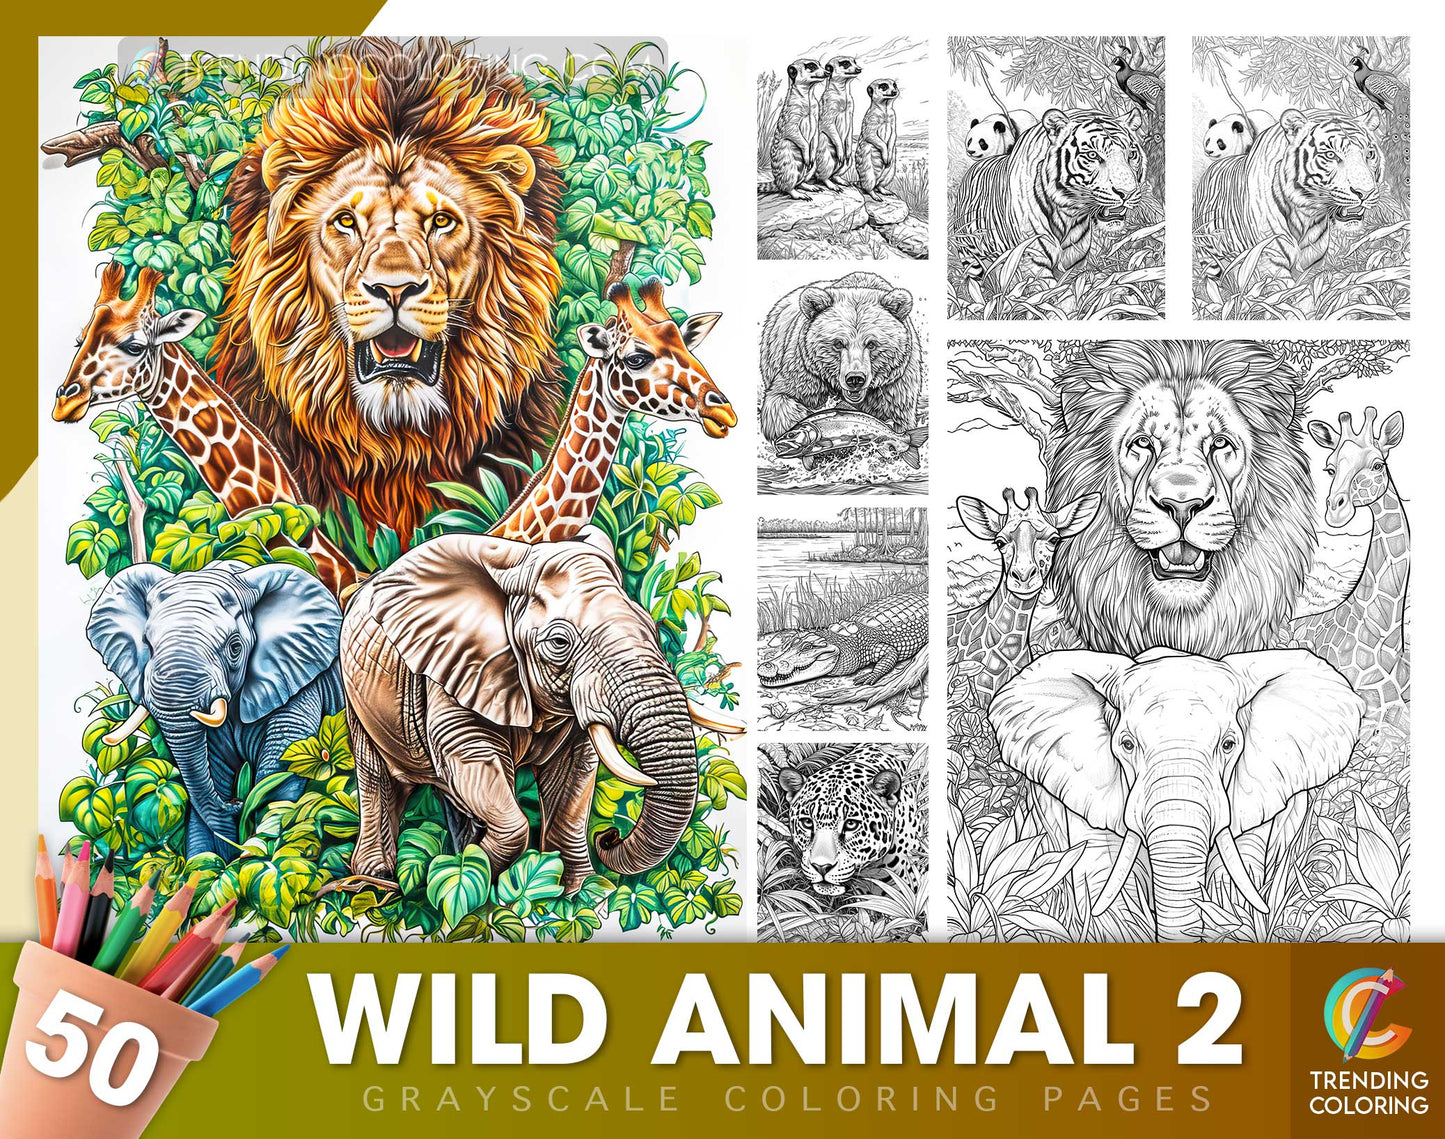 50 Wild Animal 2 Grayscale Coloring Pages - Instant Download - Printable Dark/Light